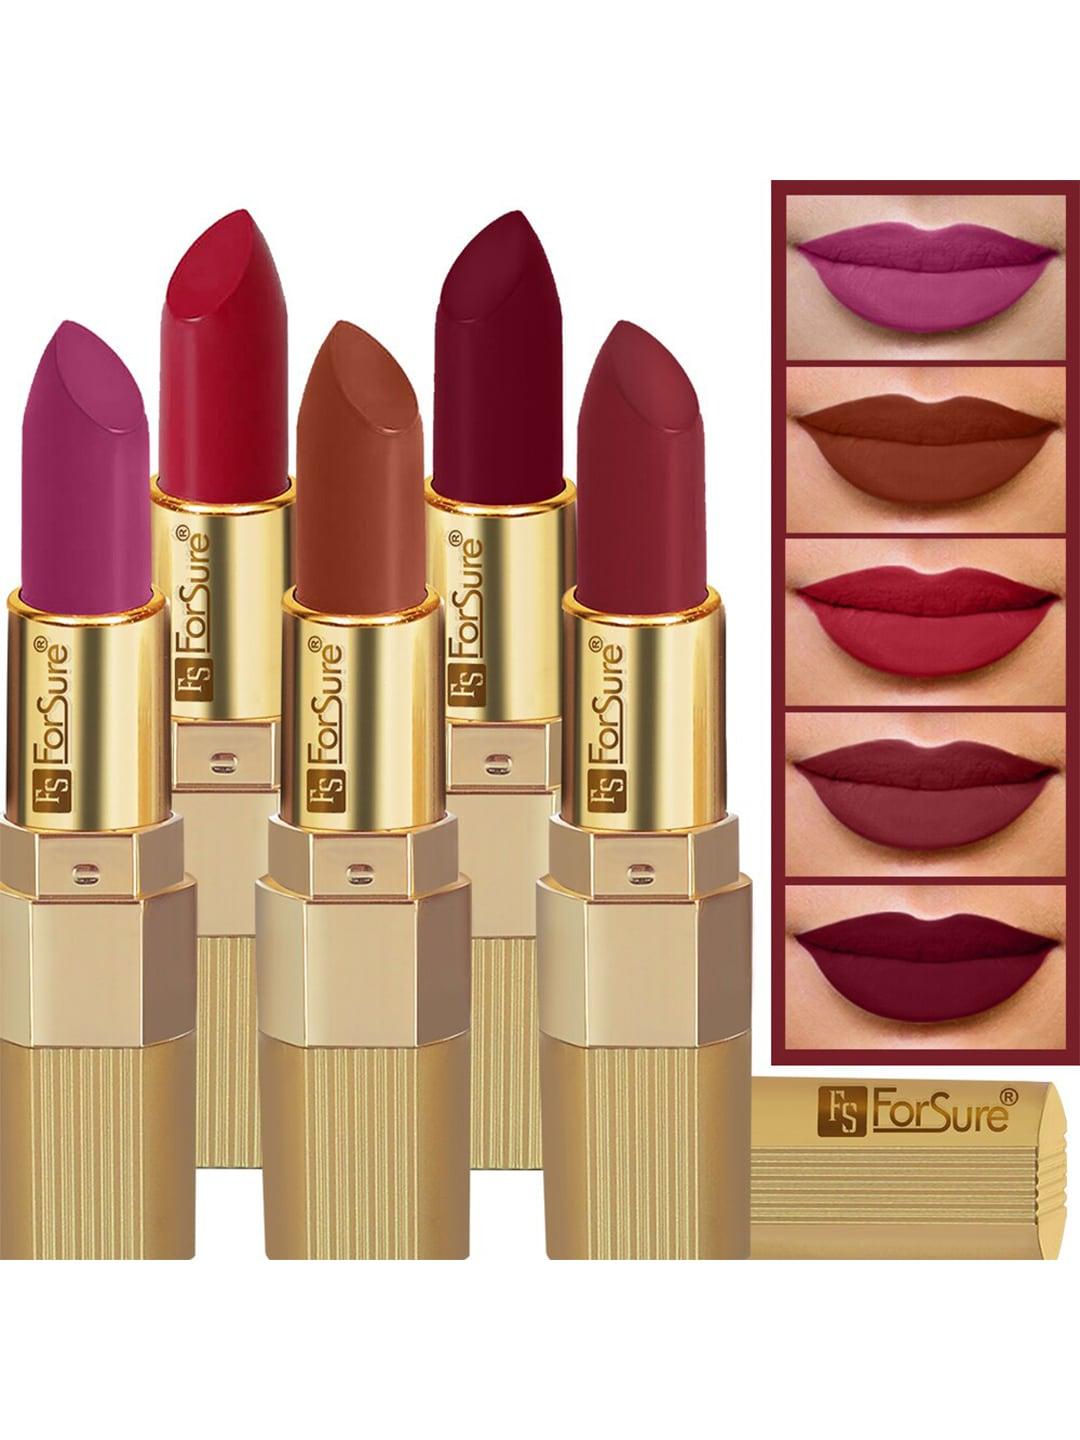 ForSure Set Of 5 Xpression Long Lasting Highly Pigmented Creamy Matte Lipstick - 3.5g Each